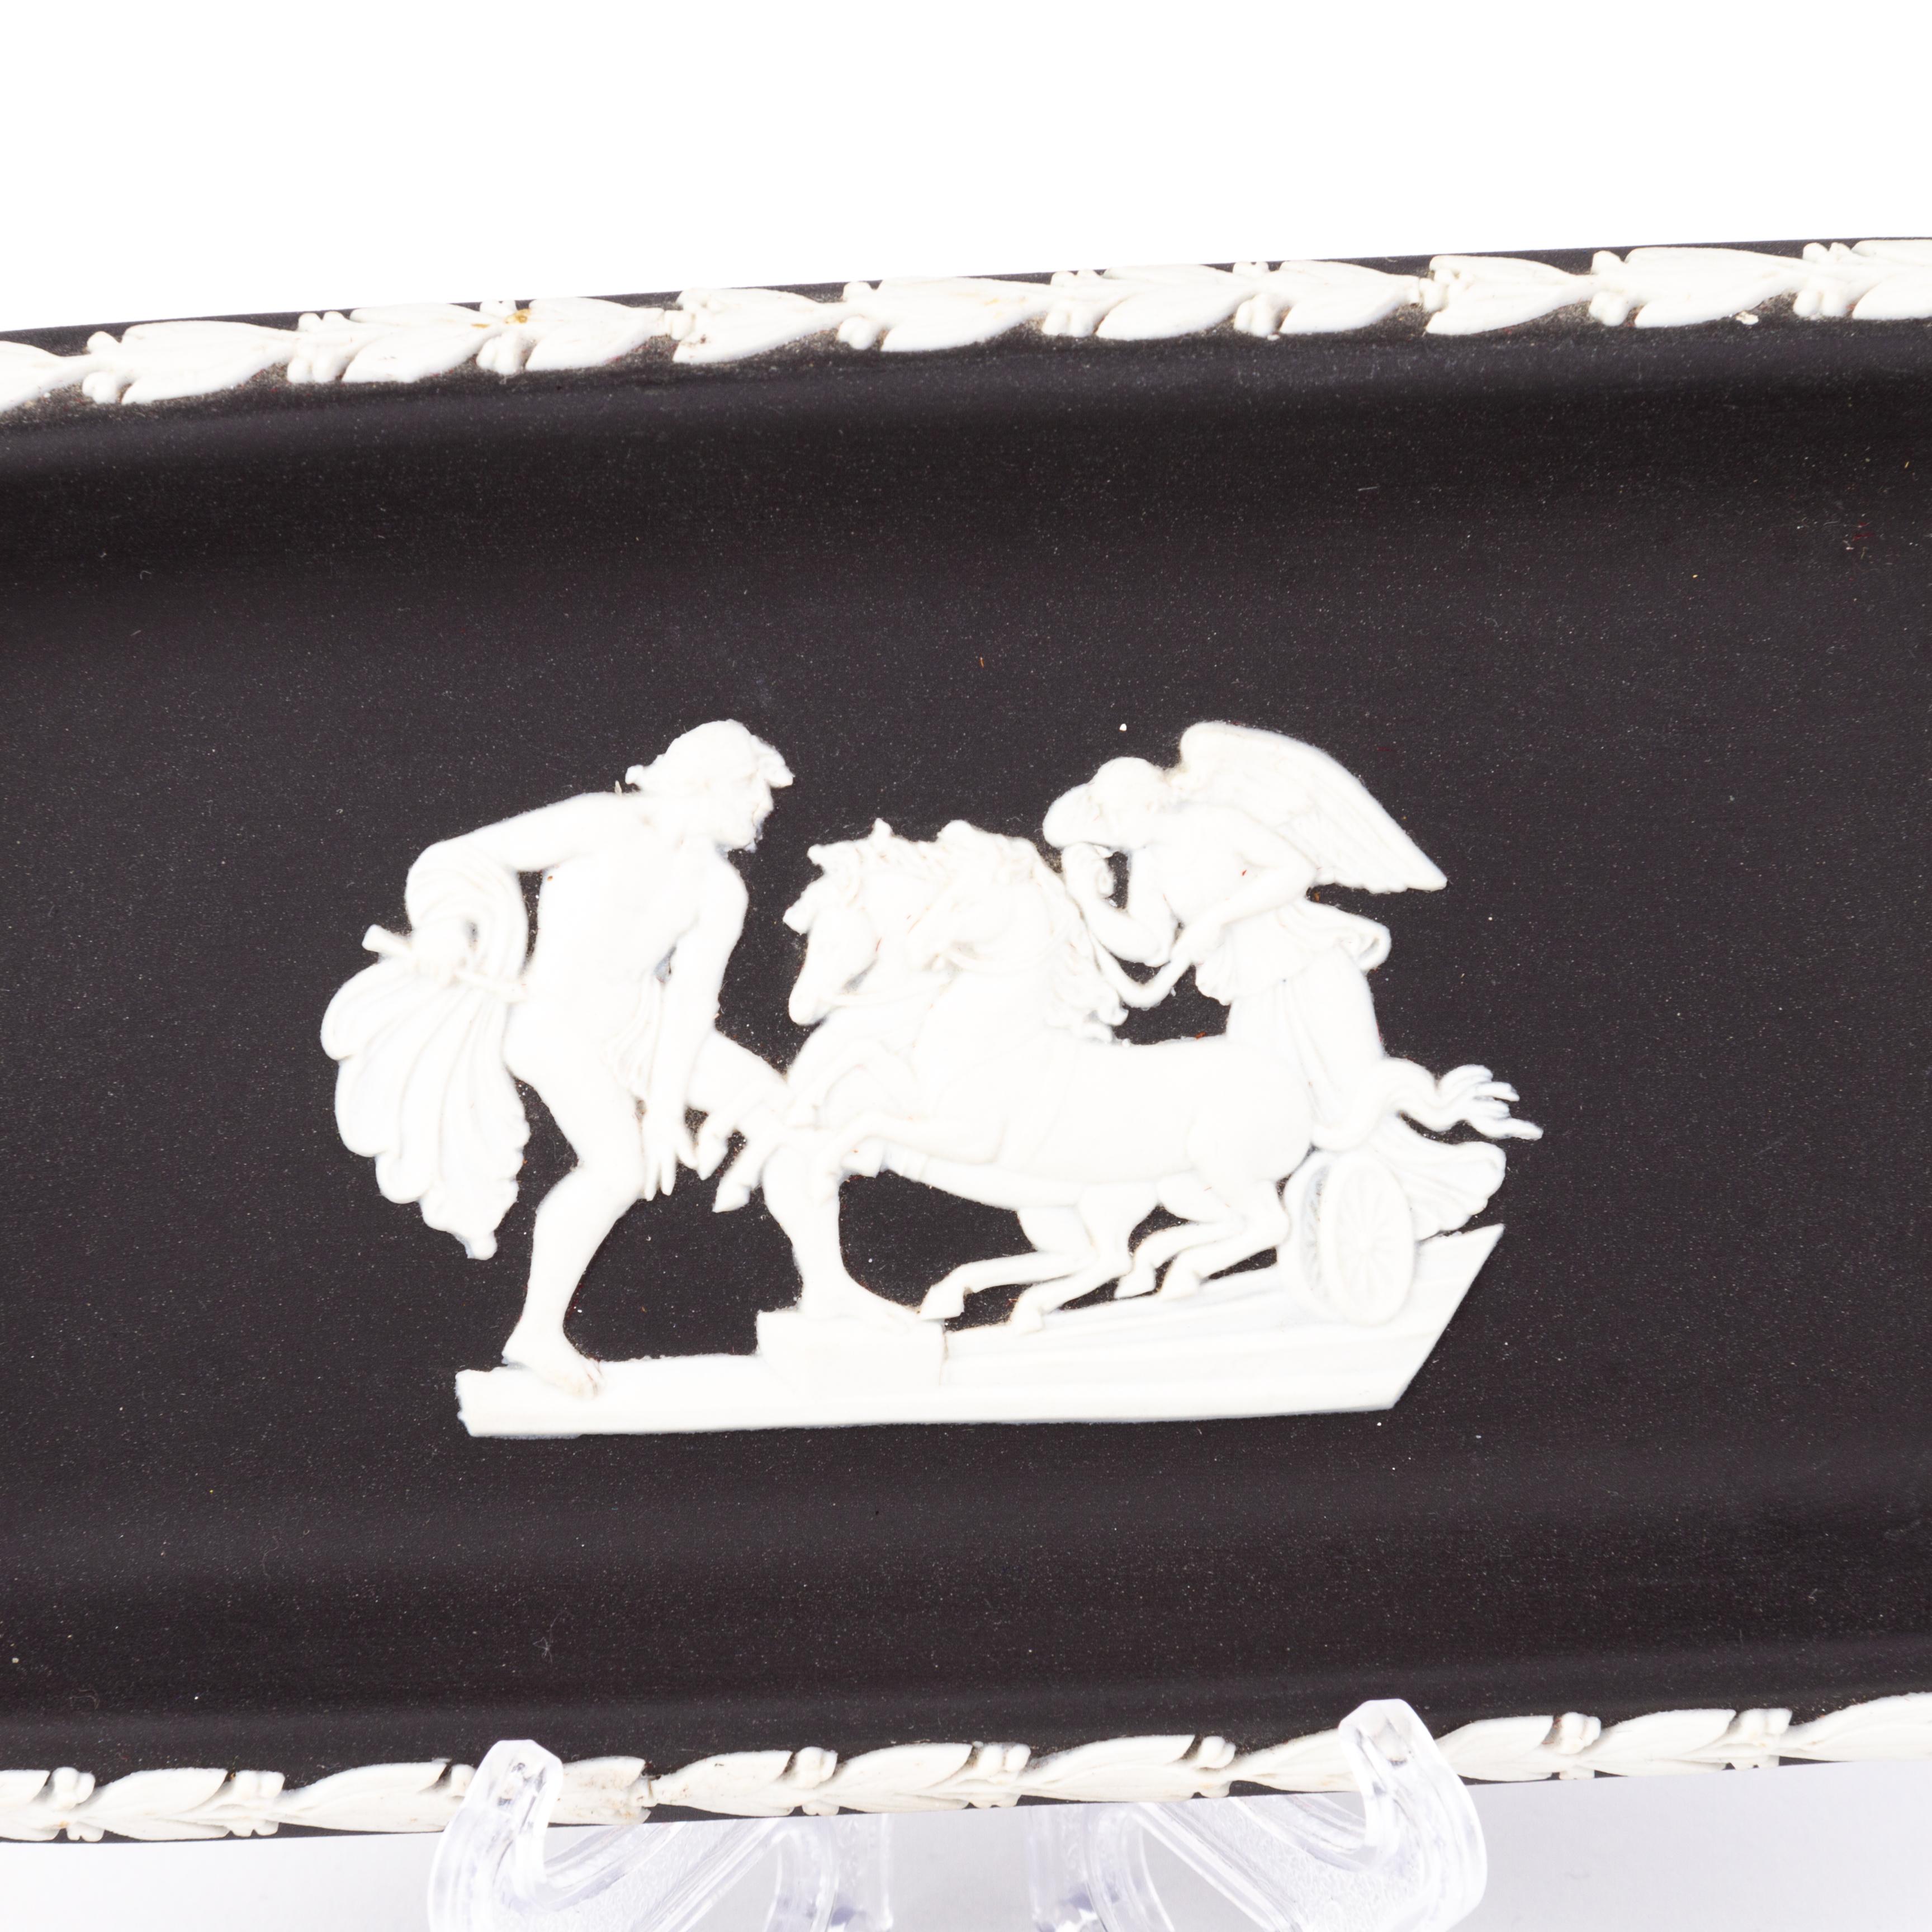 Wedgwood Black Basalt Jasperware Neoclassical Cameo Dish Pocket Empty Tray 
Good condition overall
From a private collection.
Free international shipping.